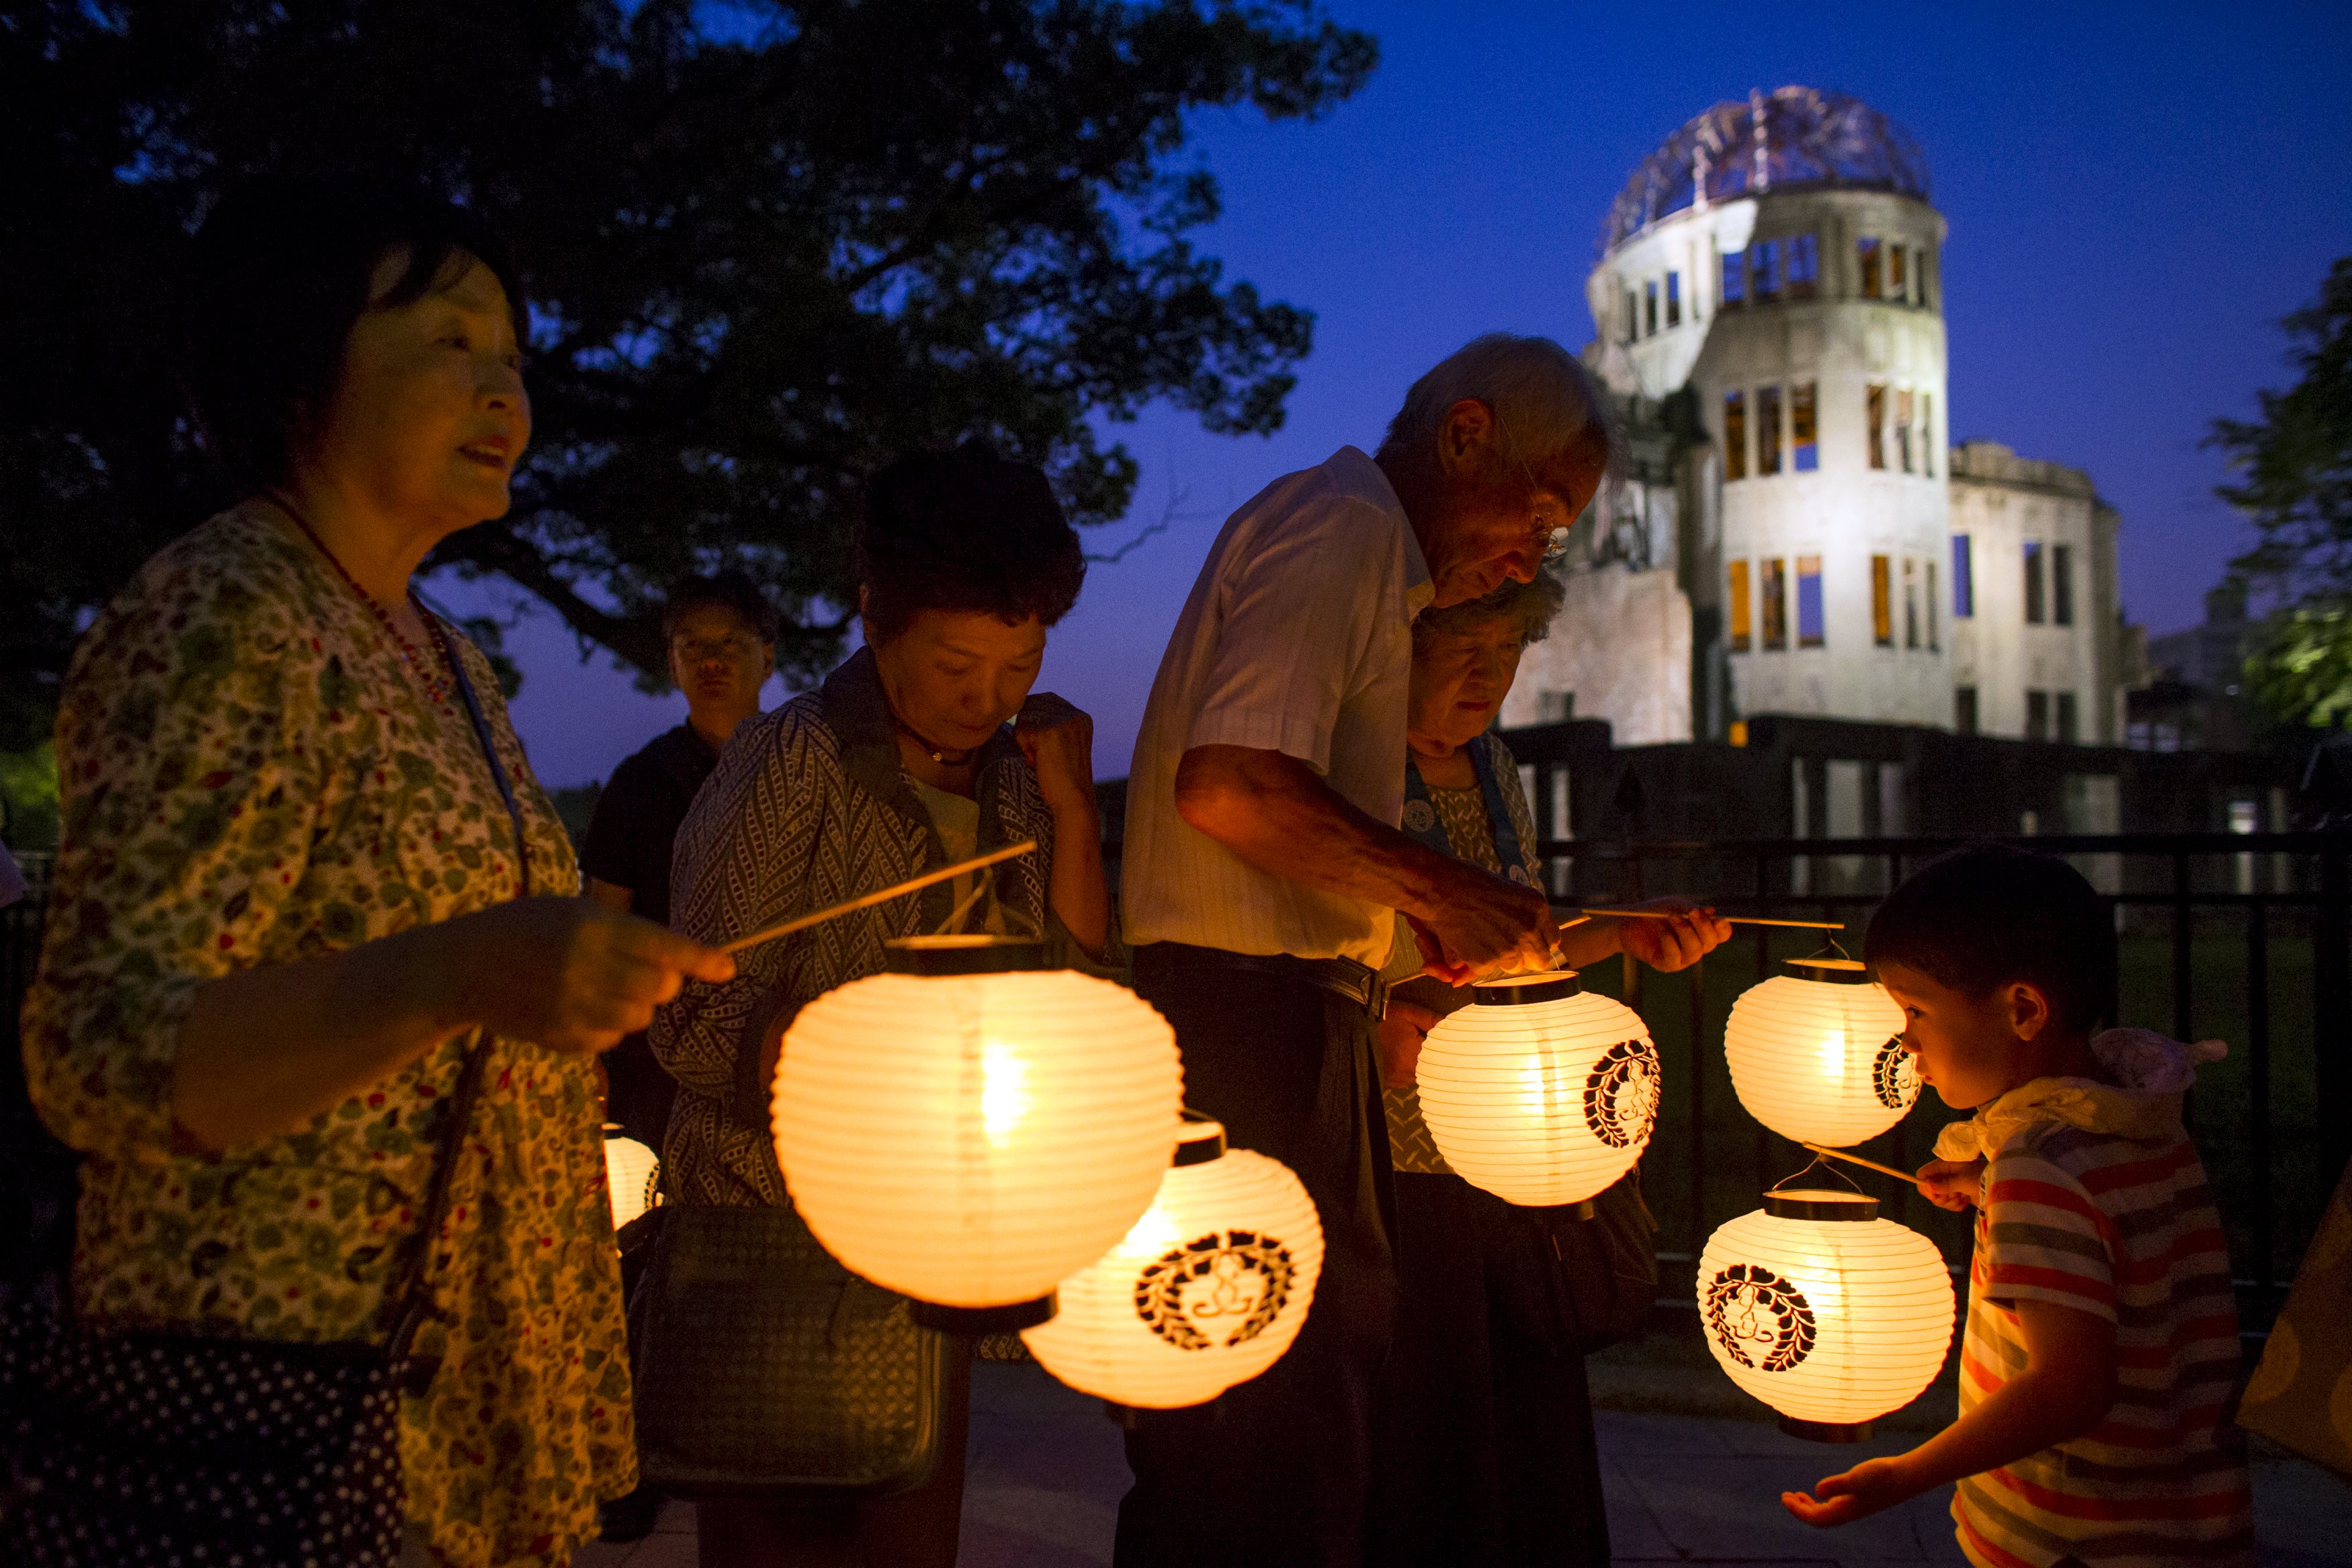 US President Obama’s visit to Hiroshima should be viewed positively